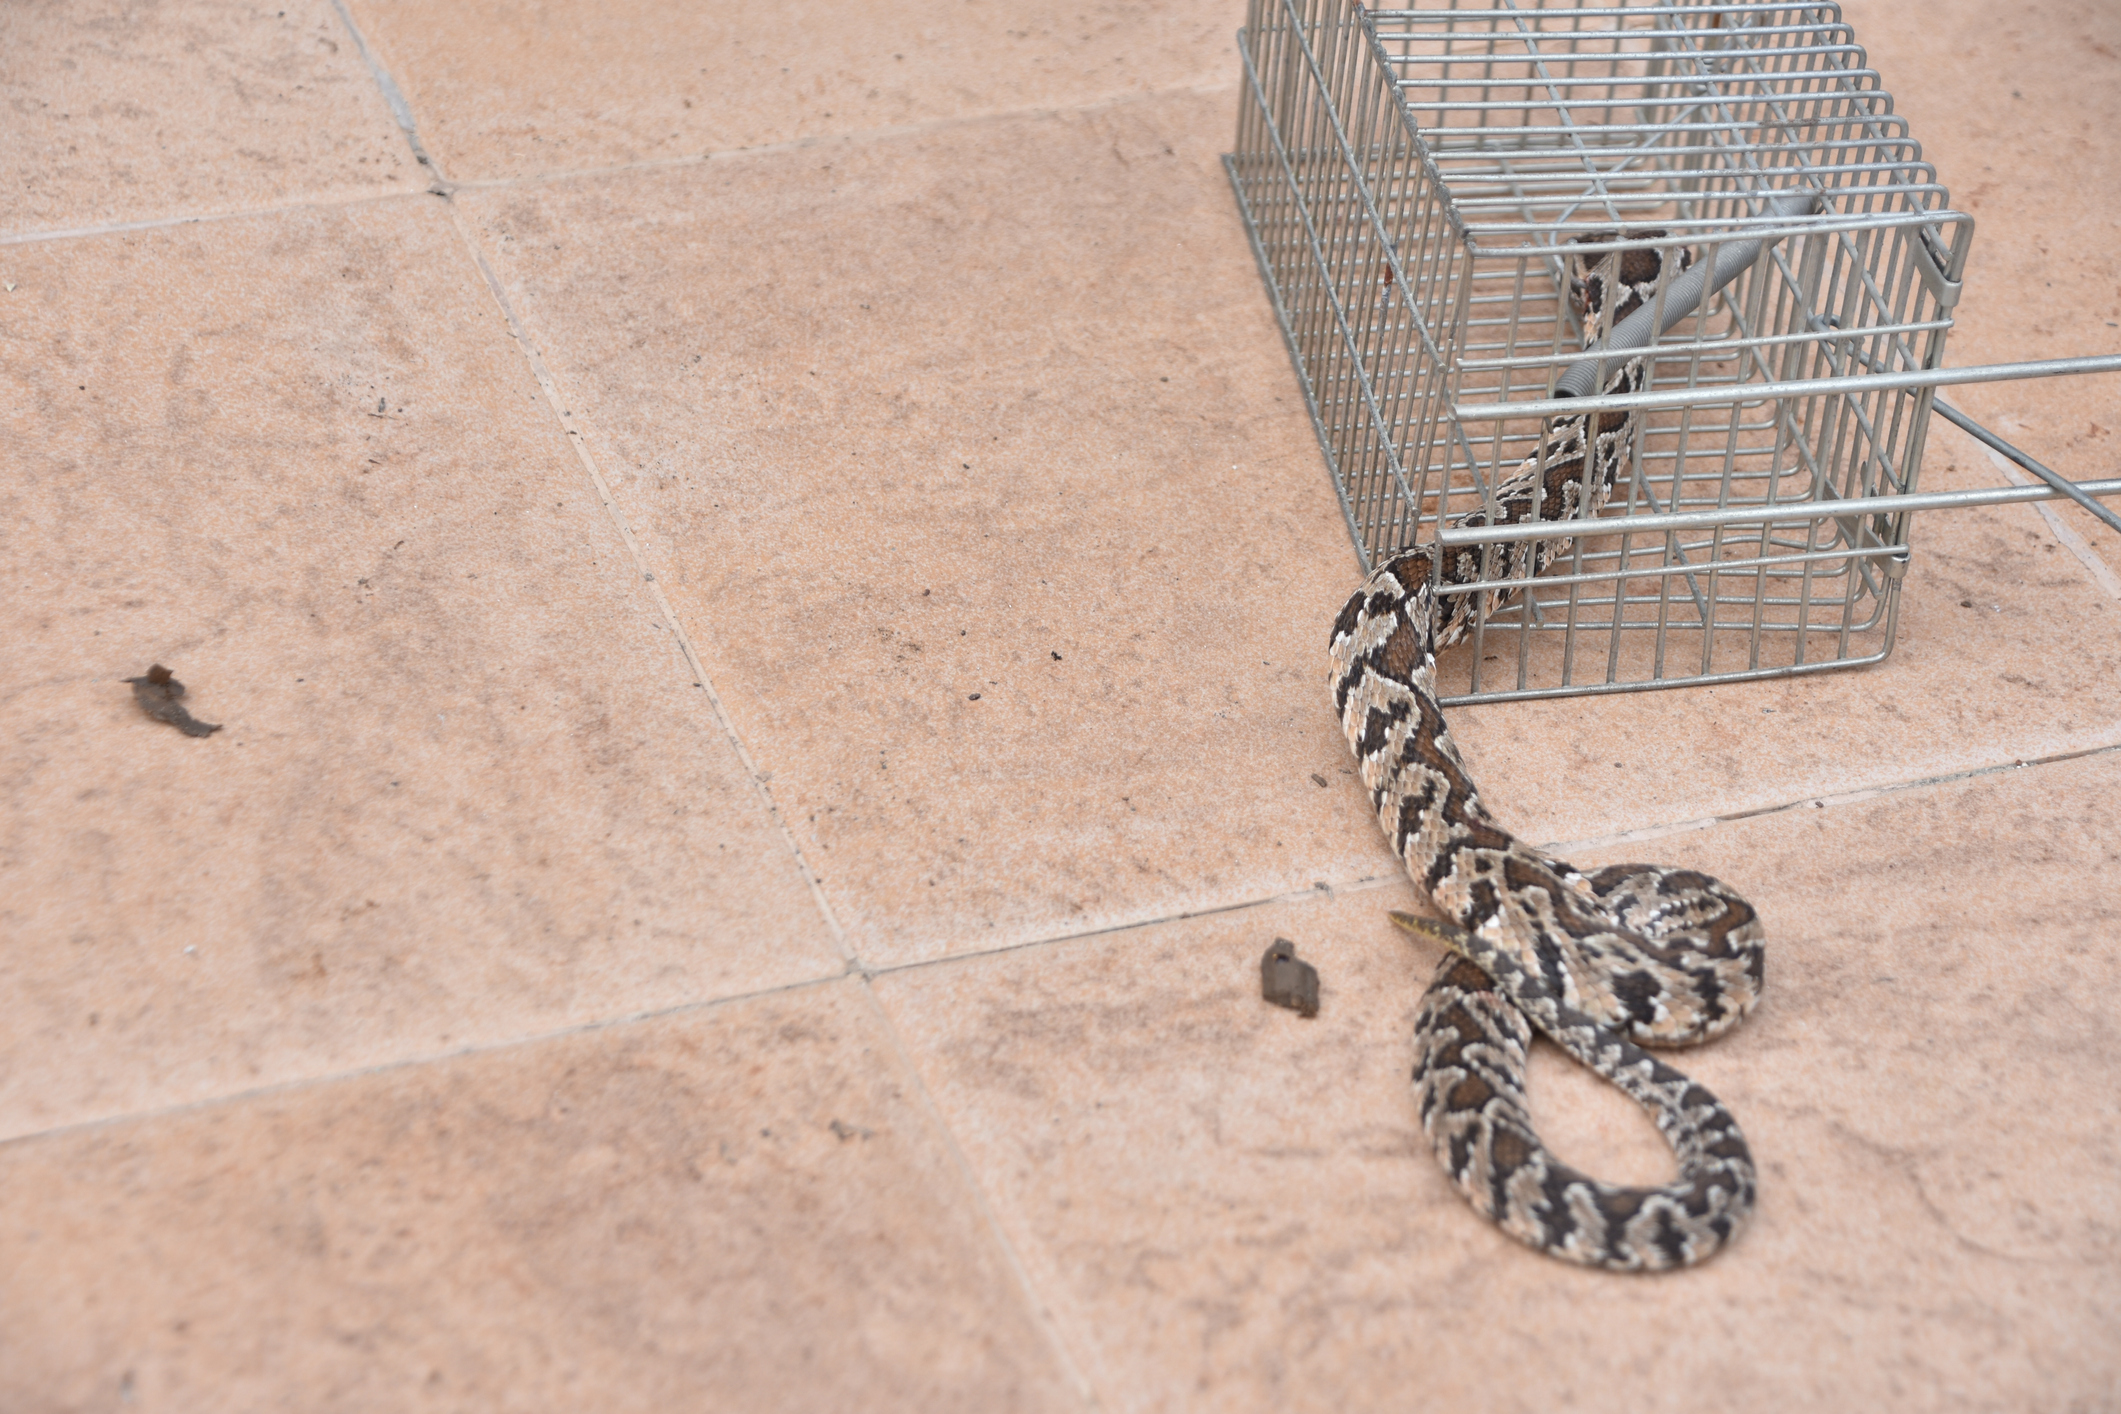 How to Deal with an Invasive Snake